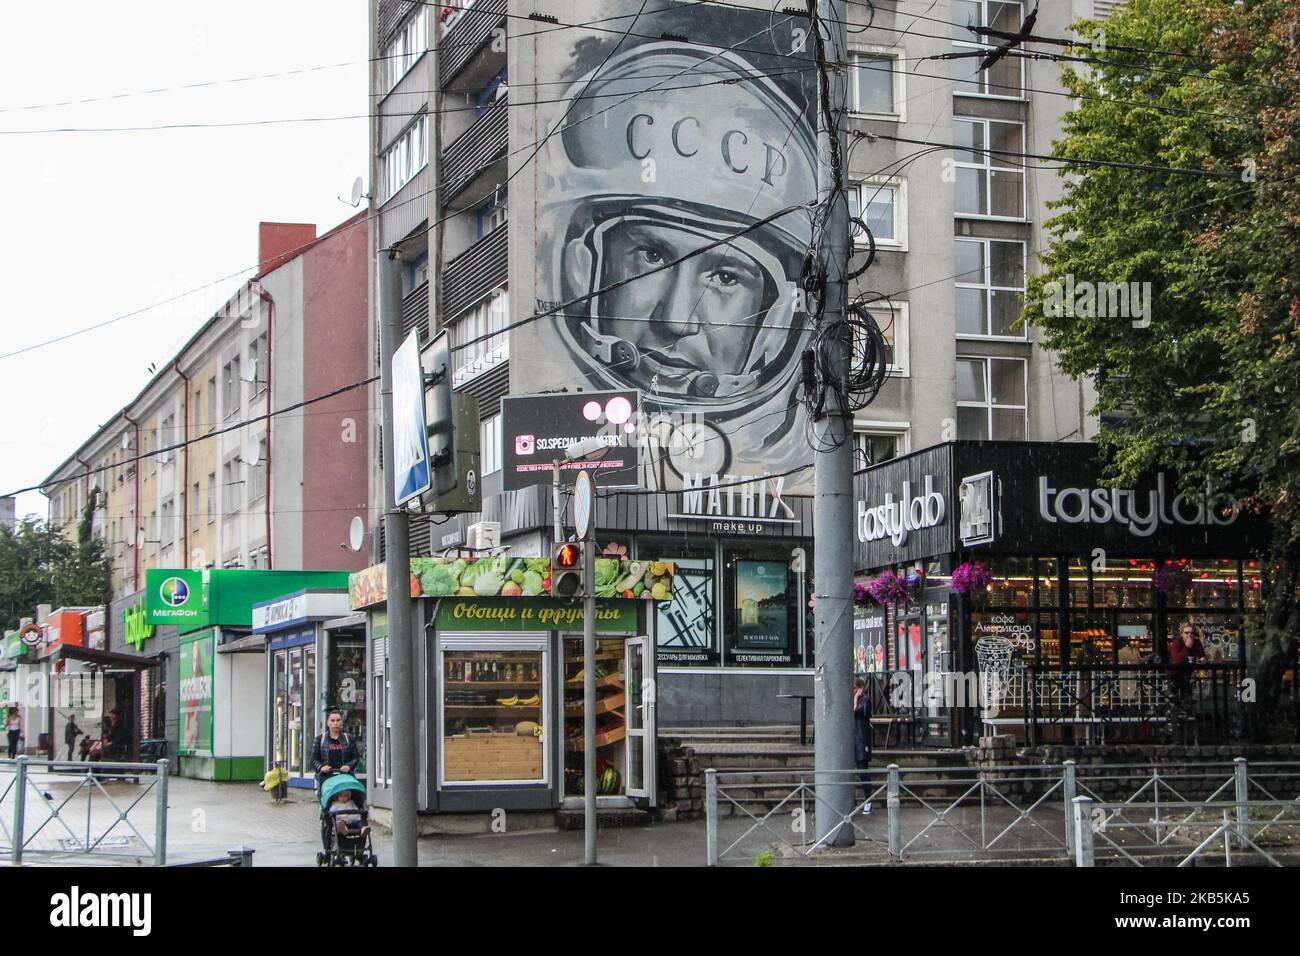 Giant mural with Alexei Leonov (Alexei Arkhipovich Leonov) portrait wearing space helmet is seen in Kaliningrad, Russia, on 8 September 2019 Leonov is the first man to walk in space, and honorary citizen of Kaliningrad. On 18.03.1965, he became the first human to conduct extravehicular activity (EVA), exiting the capsule during the Voskhod 2 mission for a 12-minute spacewalk. (Photo by Michal Fludra/NurPhoto) Stock Photo